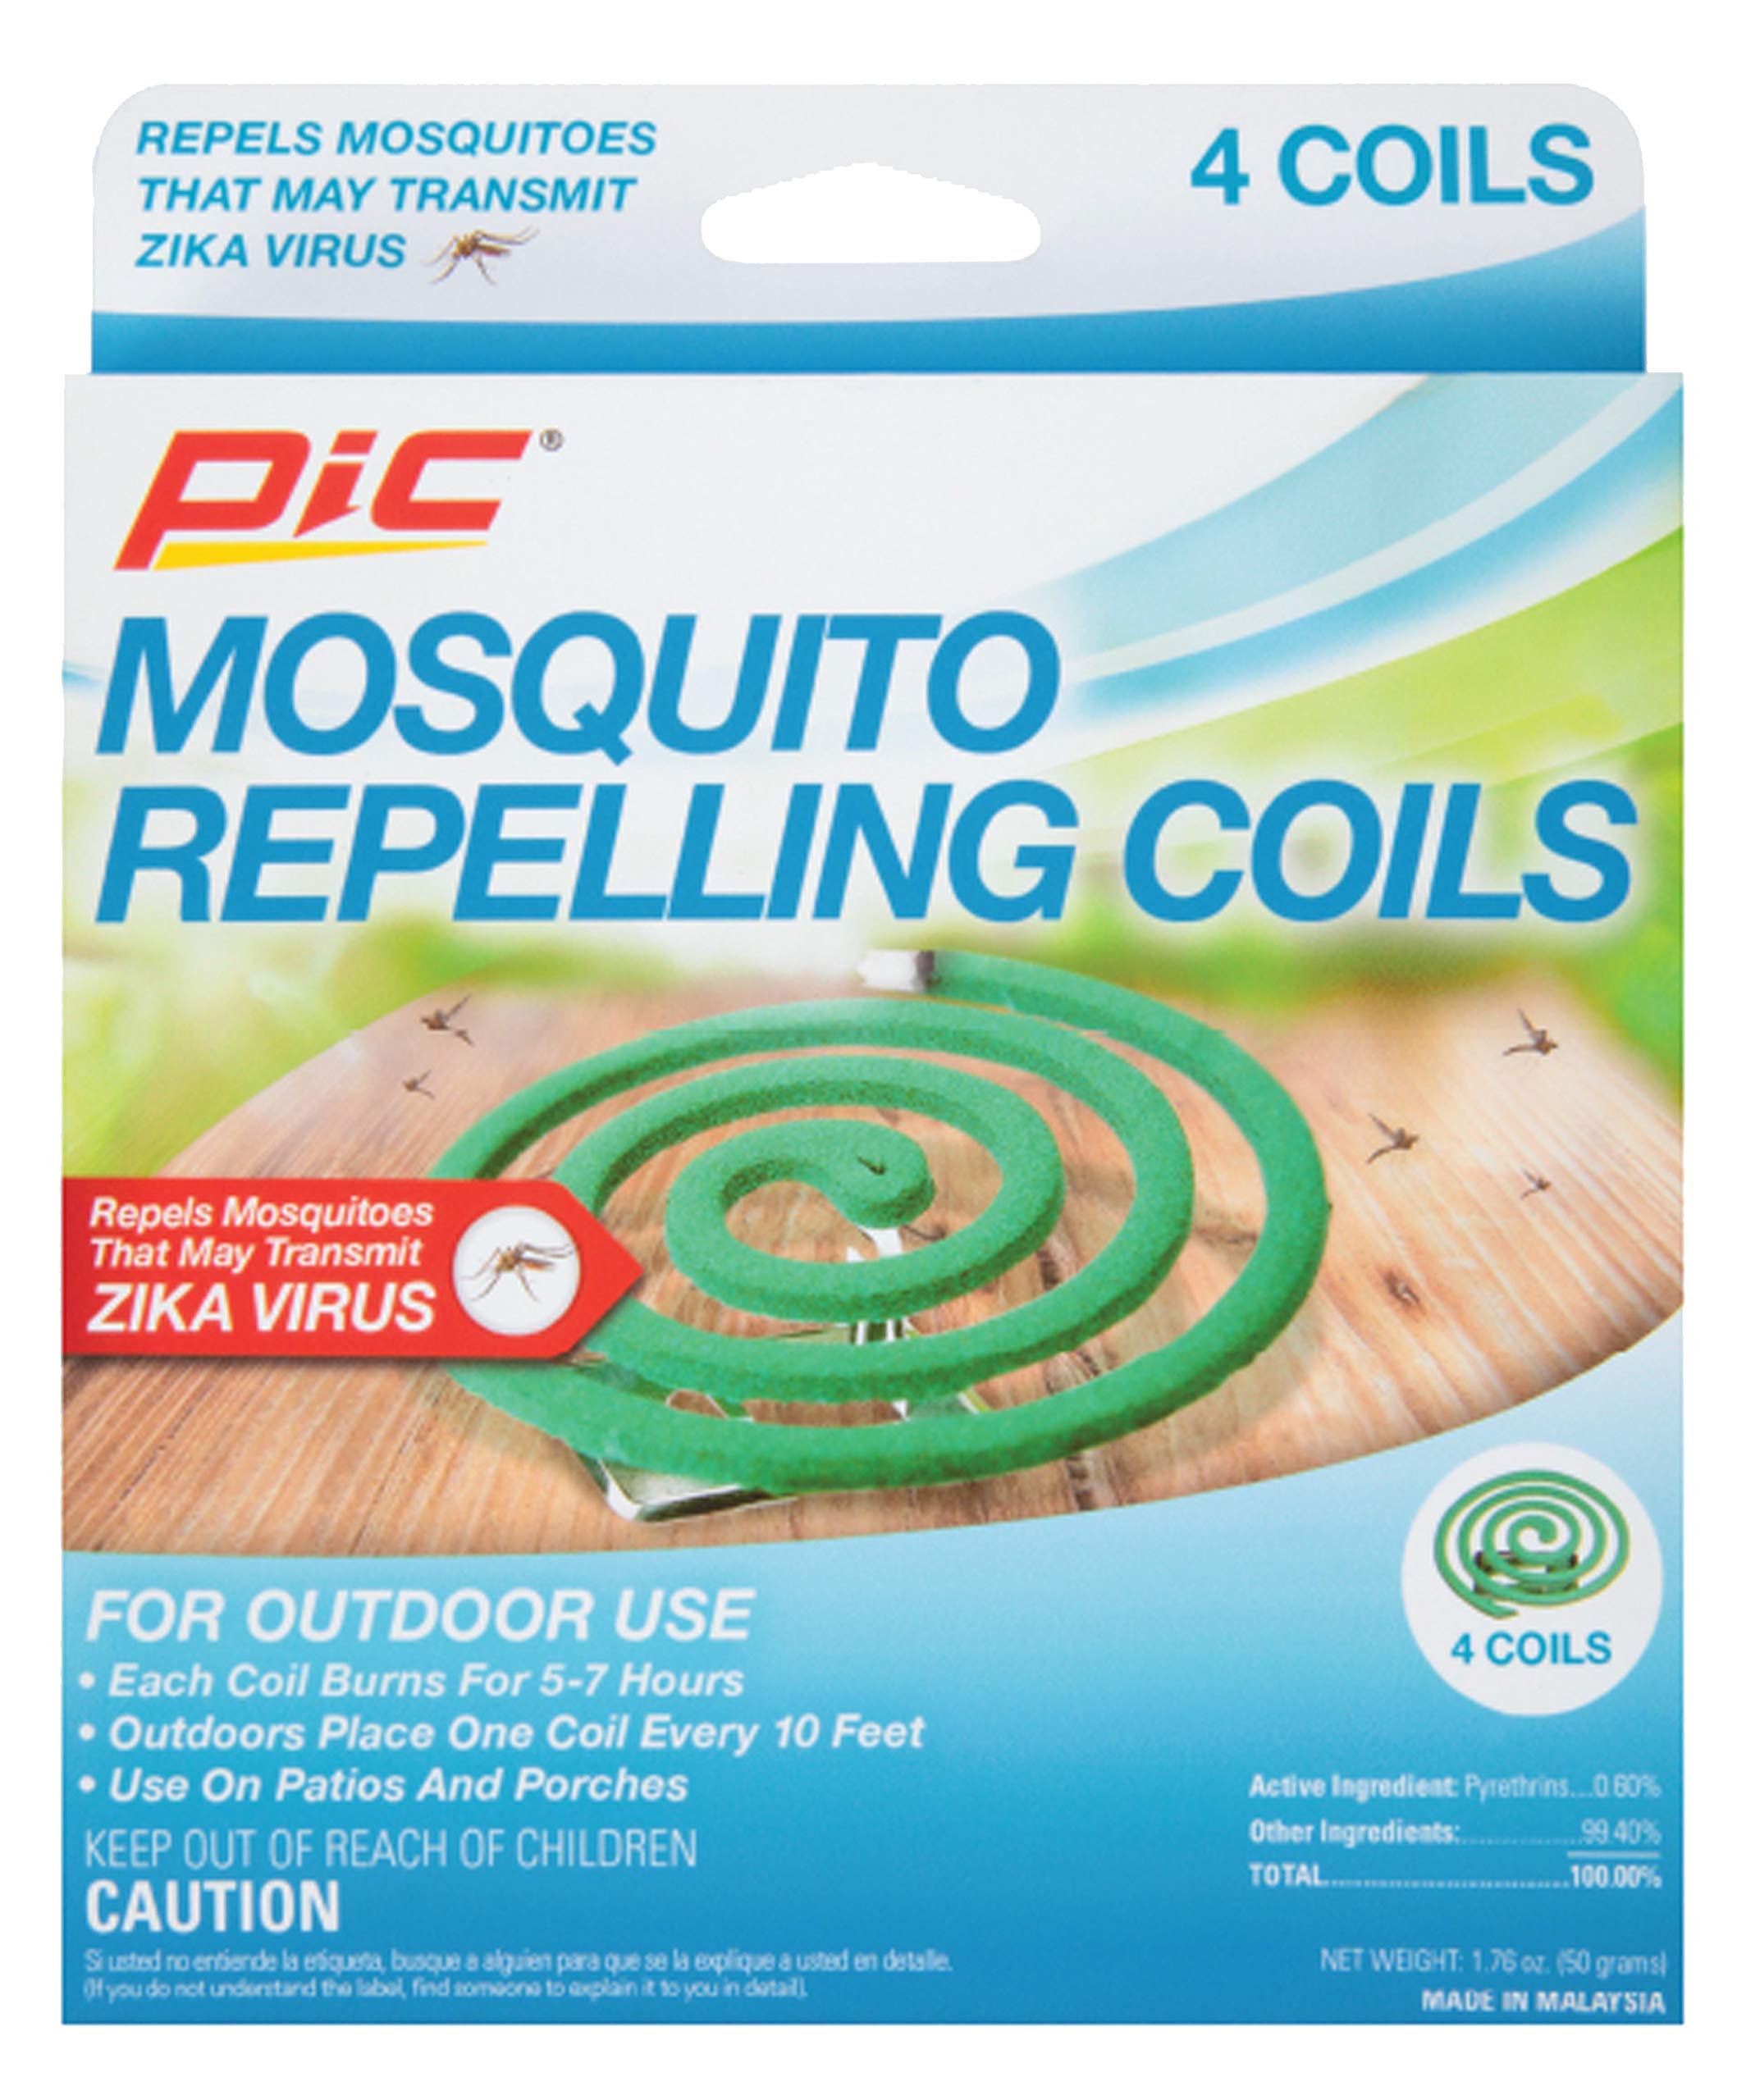 PIC Mosquito Repelling Coils, 4 Count Box, 6 Pack - Mosquito Repellent for Outdoor Spaces (24 Coils Total)